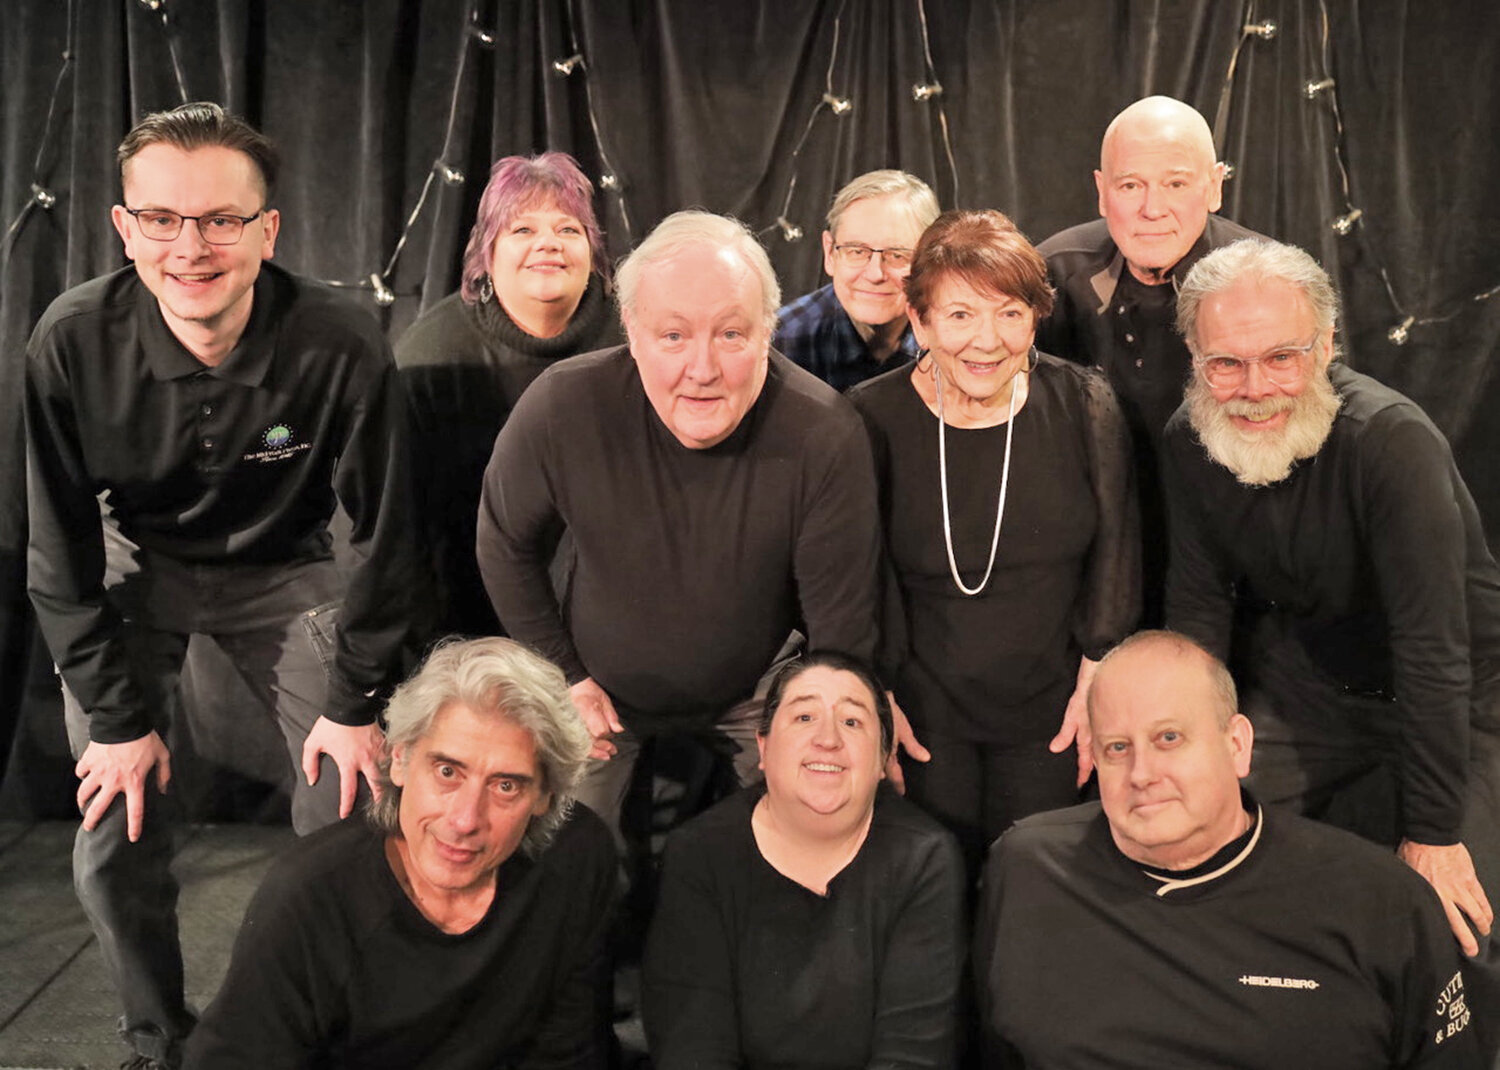 Hamilton Community Players perform “Animal House” at 7:30 p.m. April 28 and 29 at Arts at the Palace Theater Underground in Hamilton. The cast includes, front row from left, Frank Procopio, Kate Reynolds and Bob Tenney; second row from left, John Hunter Orr, Jo Ann Geller and Ted Lenio, and back row from left, Kyle Tenney, Lori Crumb, Bruce Ward and Will Doonan, plus Susan Galbraith.